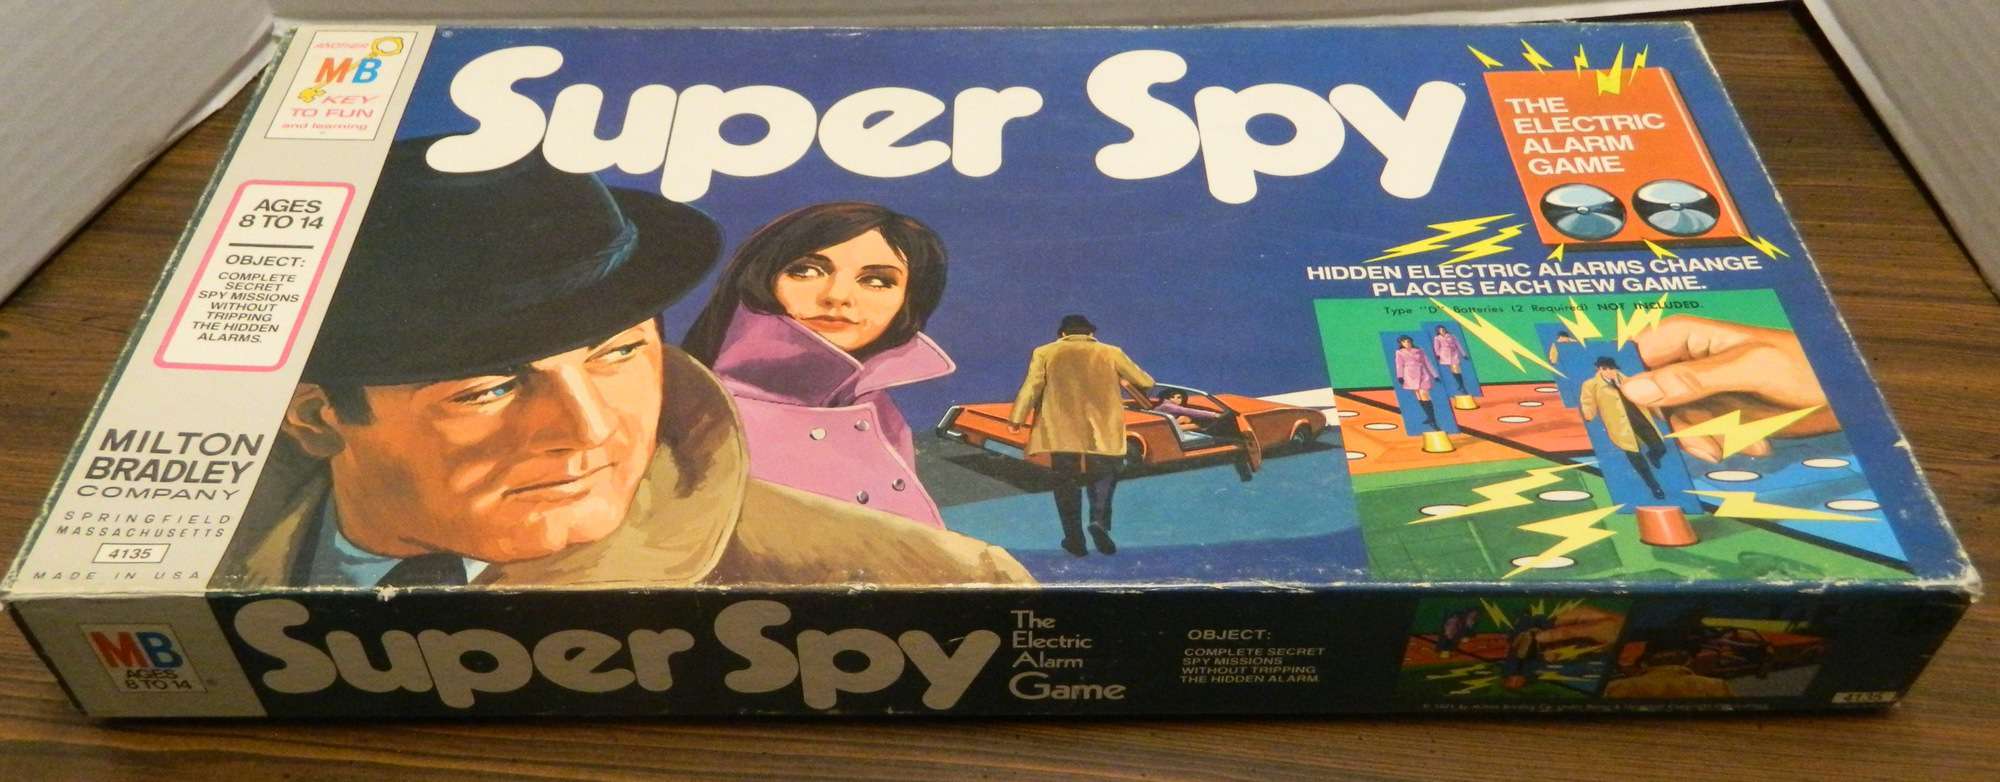 Super Spy Board Game Review and Rules